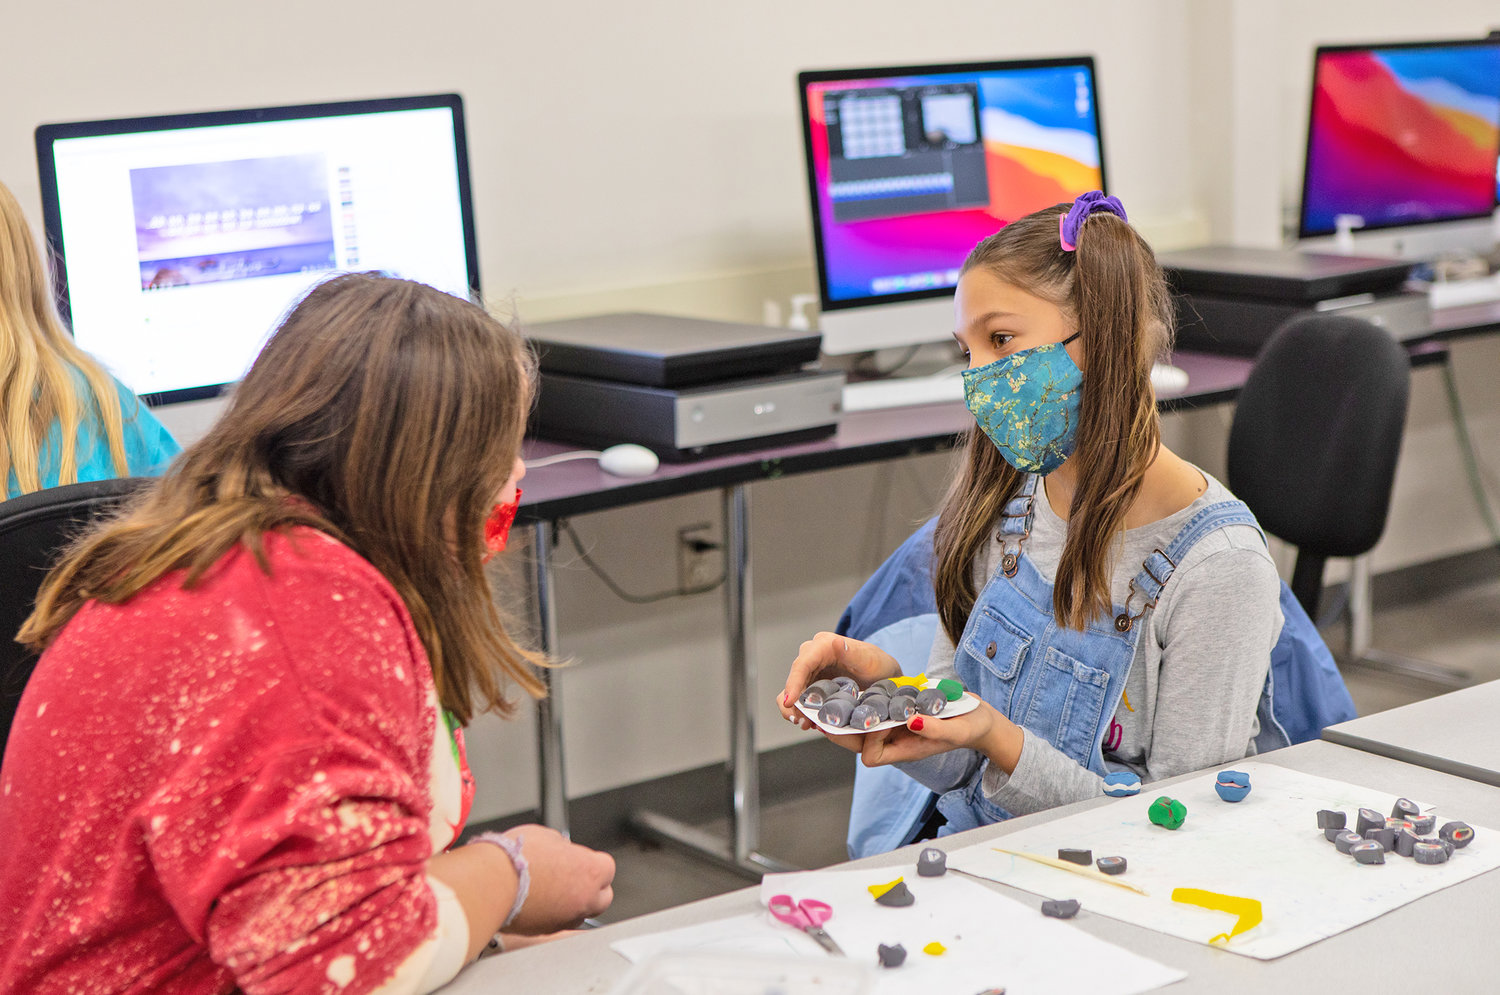 Young artists, ages 9-12, can take part in the Stop Motion Animation class taught by Meghan Pagano through the Munson-Williams Proctor Arts Institute’s Community Arts Education program. Registration for fall programming, for all ages, has begun.